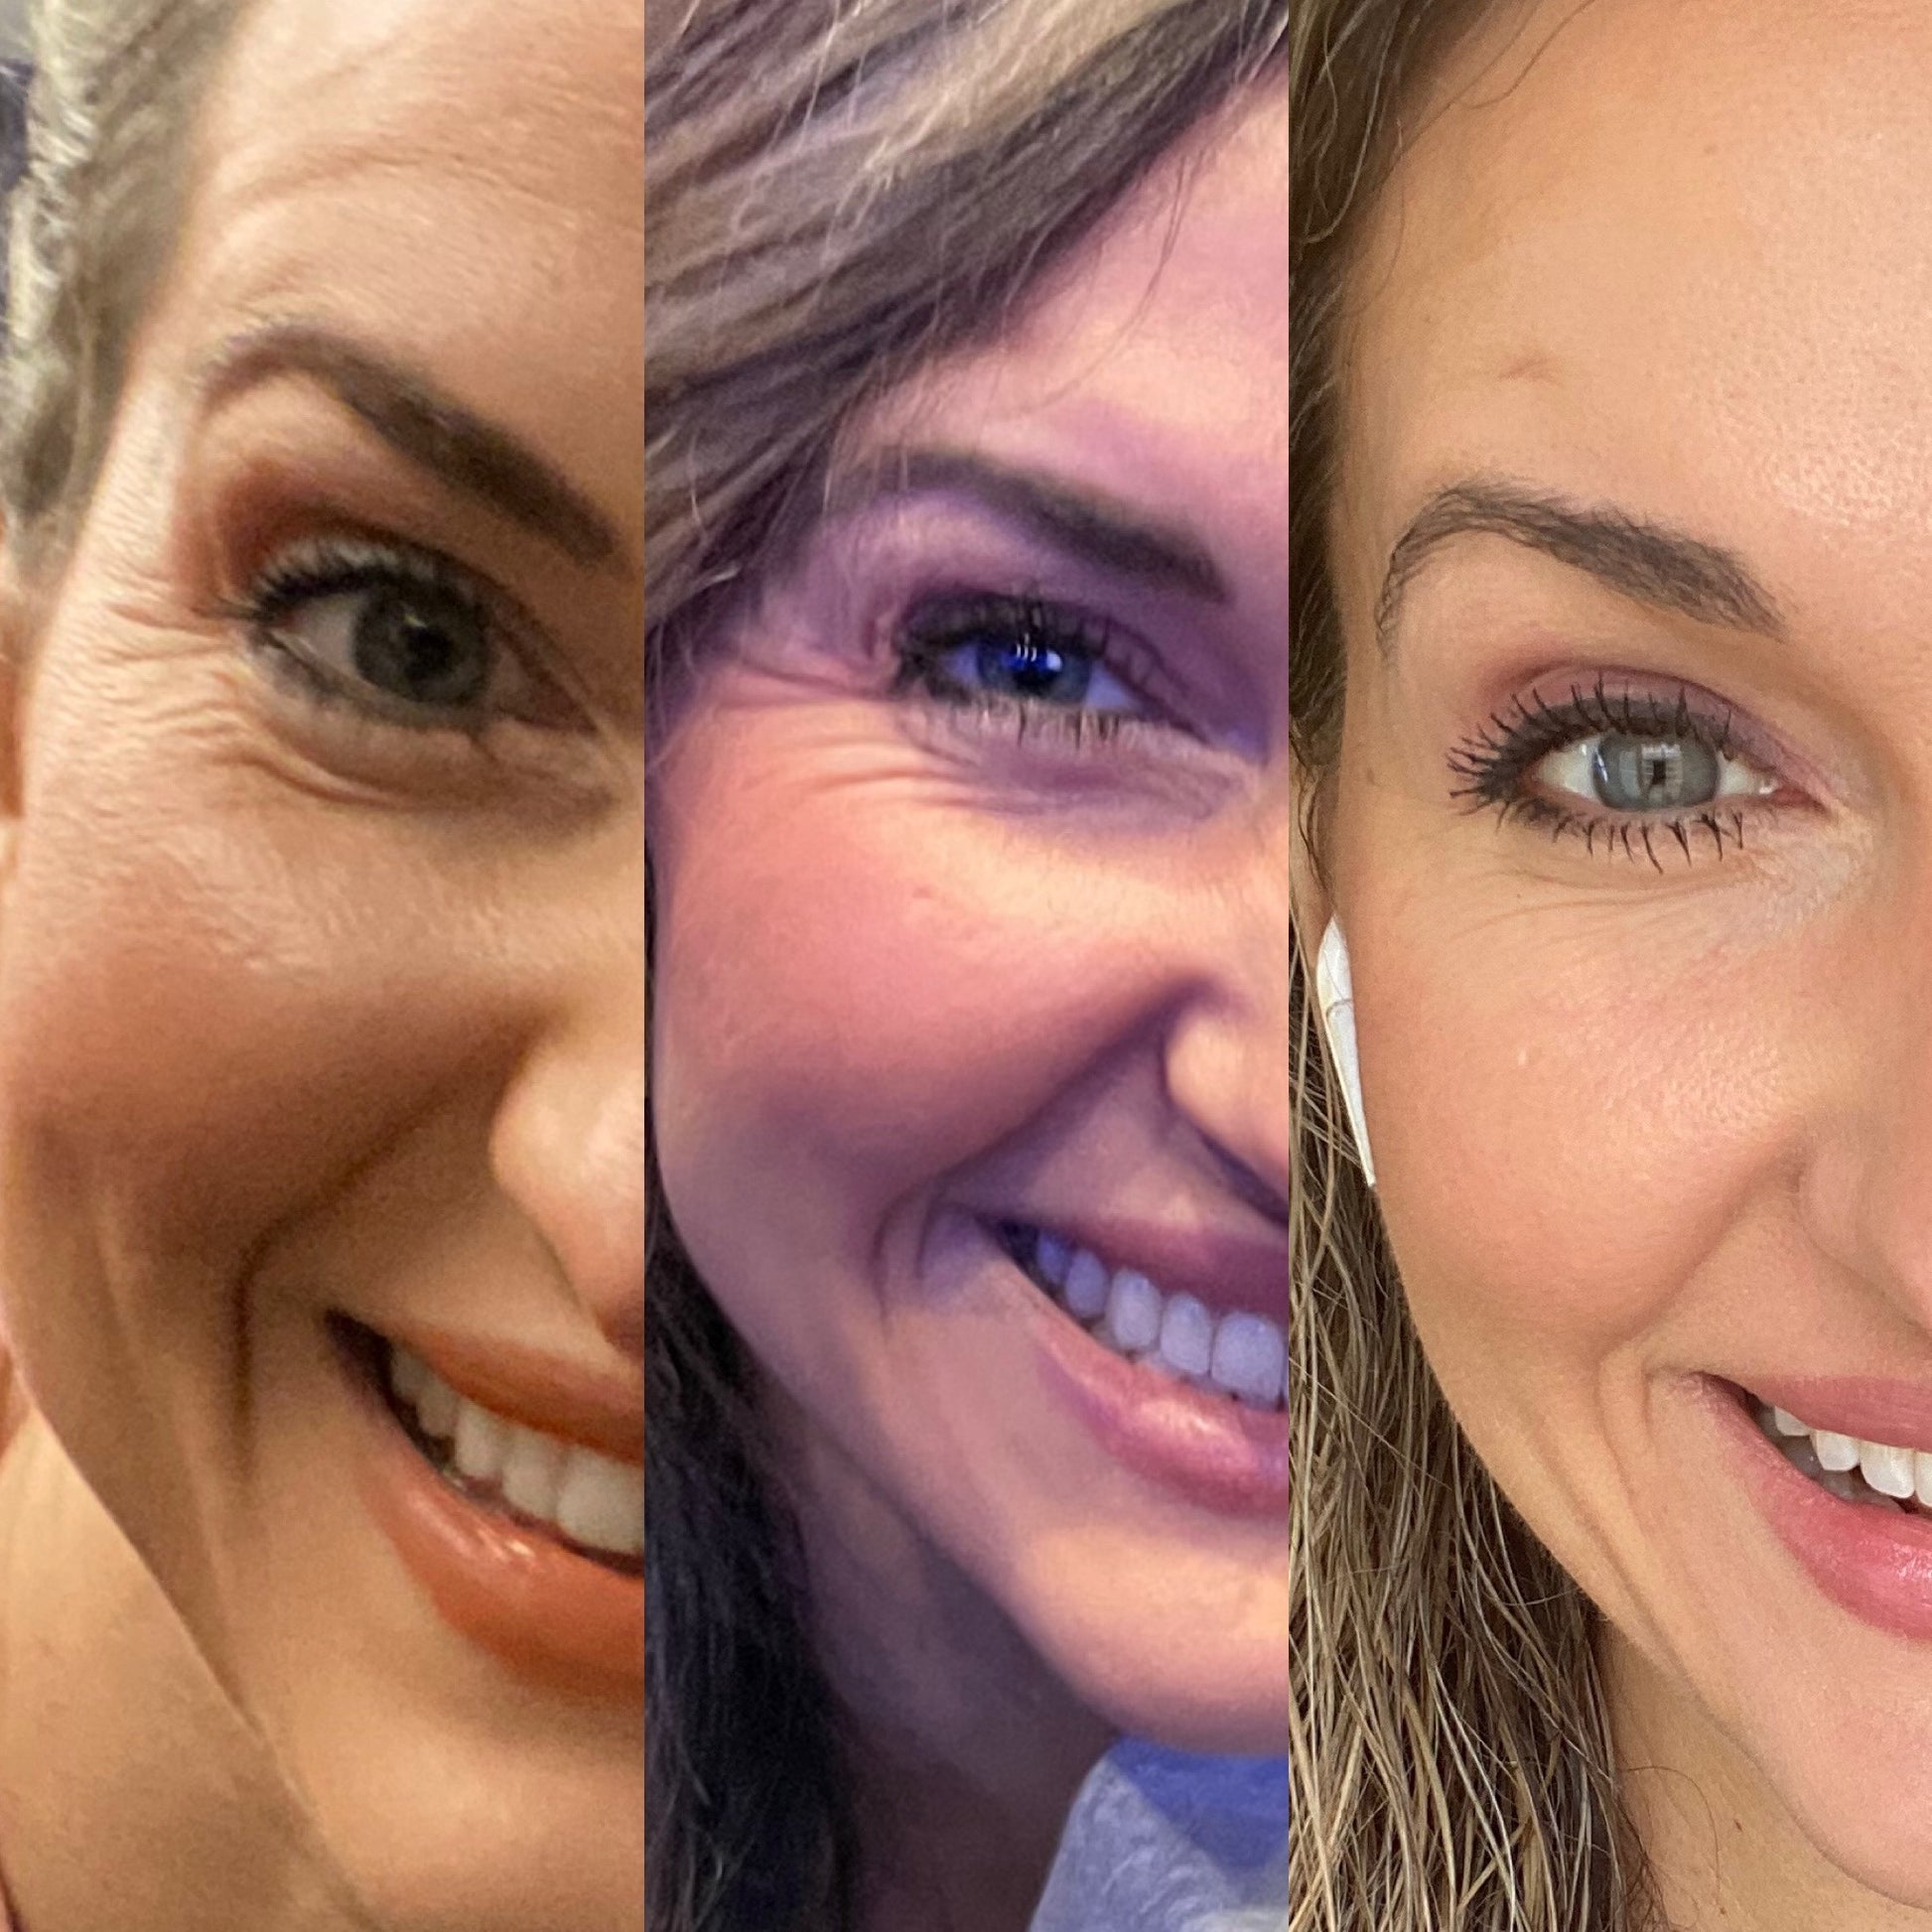 progression photos before and after woman's face using Apple Serum-Malus Domestica-Apple Stem Cell Extract Skincare Products The Frownies to smooth fine lines around the eyes 